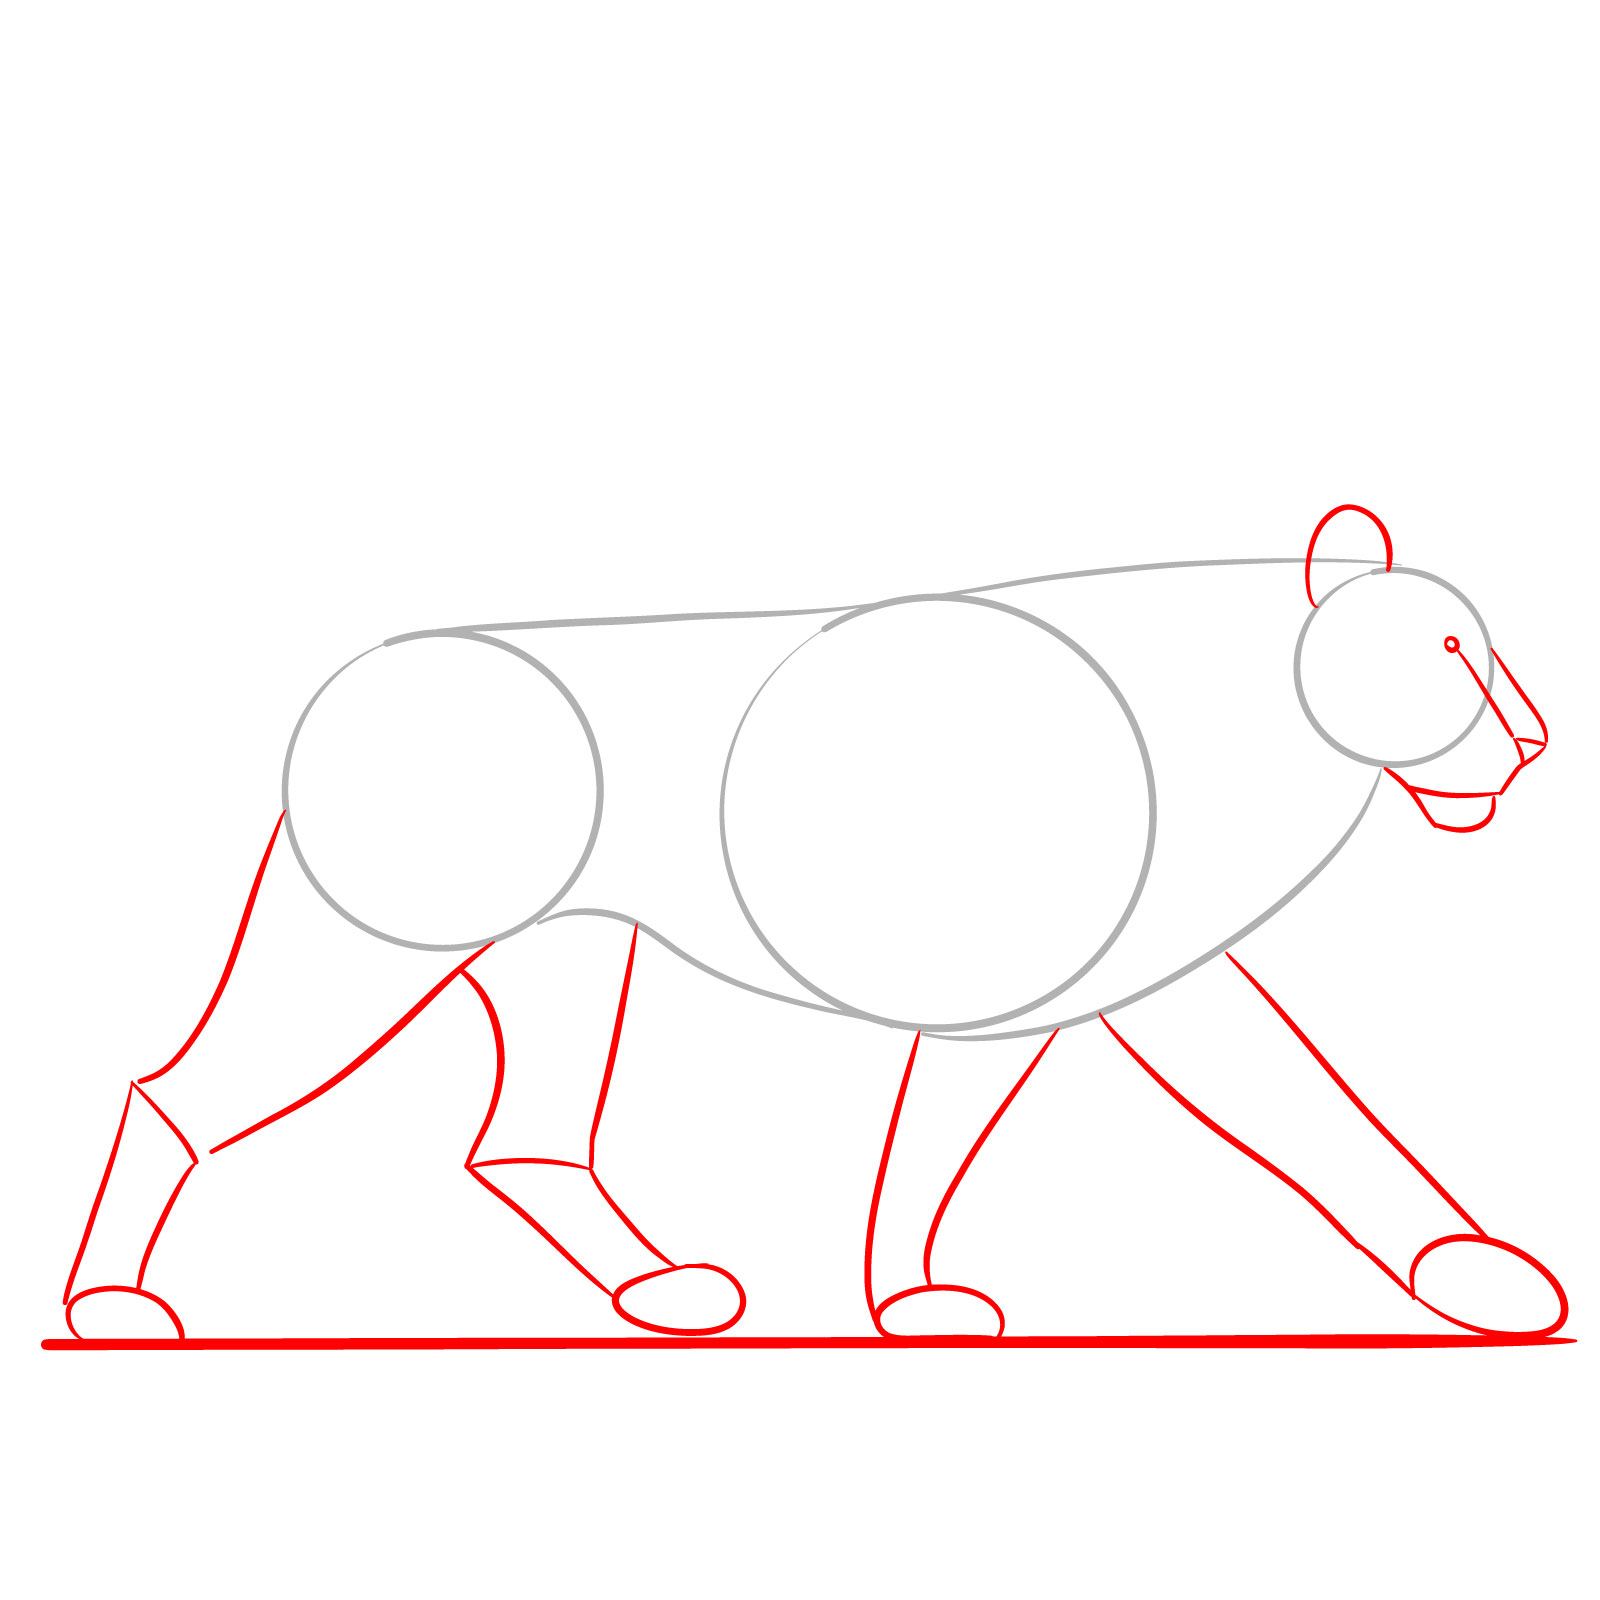 Step 2 in drawing a walking lion, adding details to the head and limbs